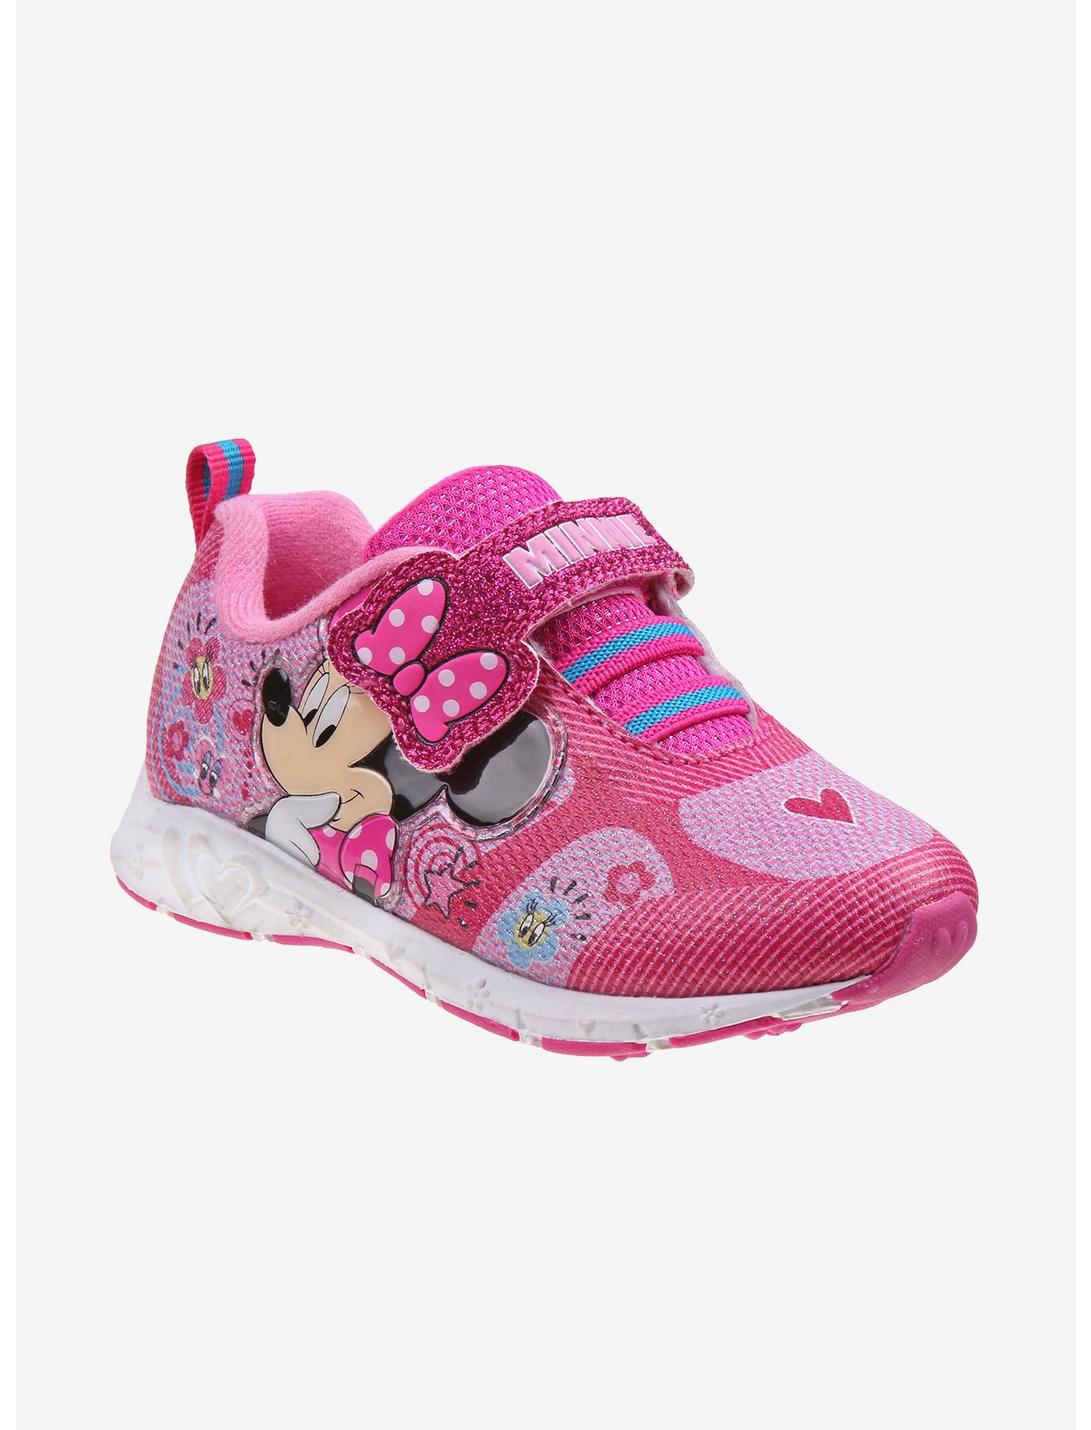 Disney Minnie Mouse Girls Toddler Sneakers, PINK, hi-res